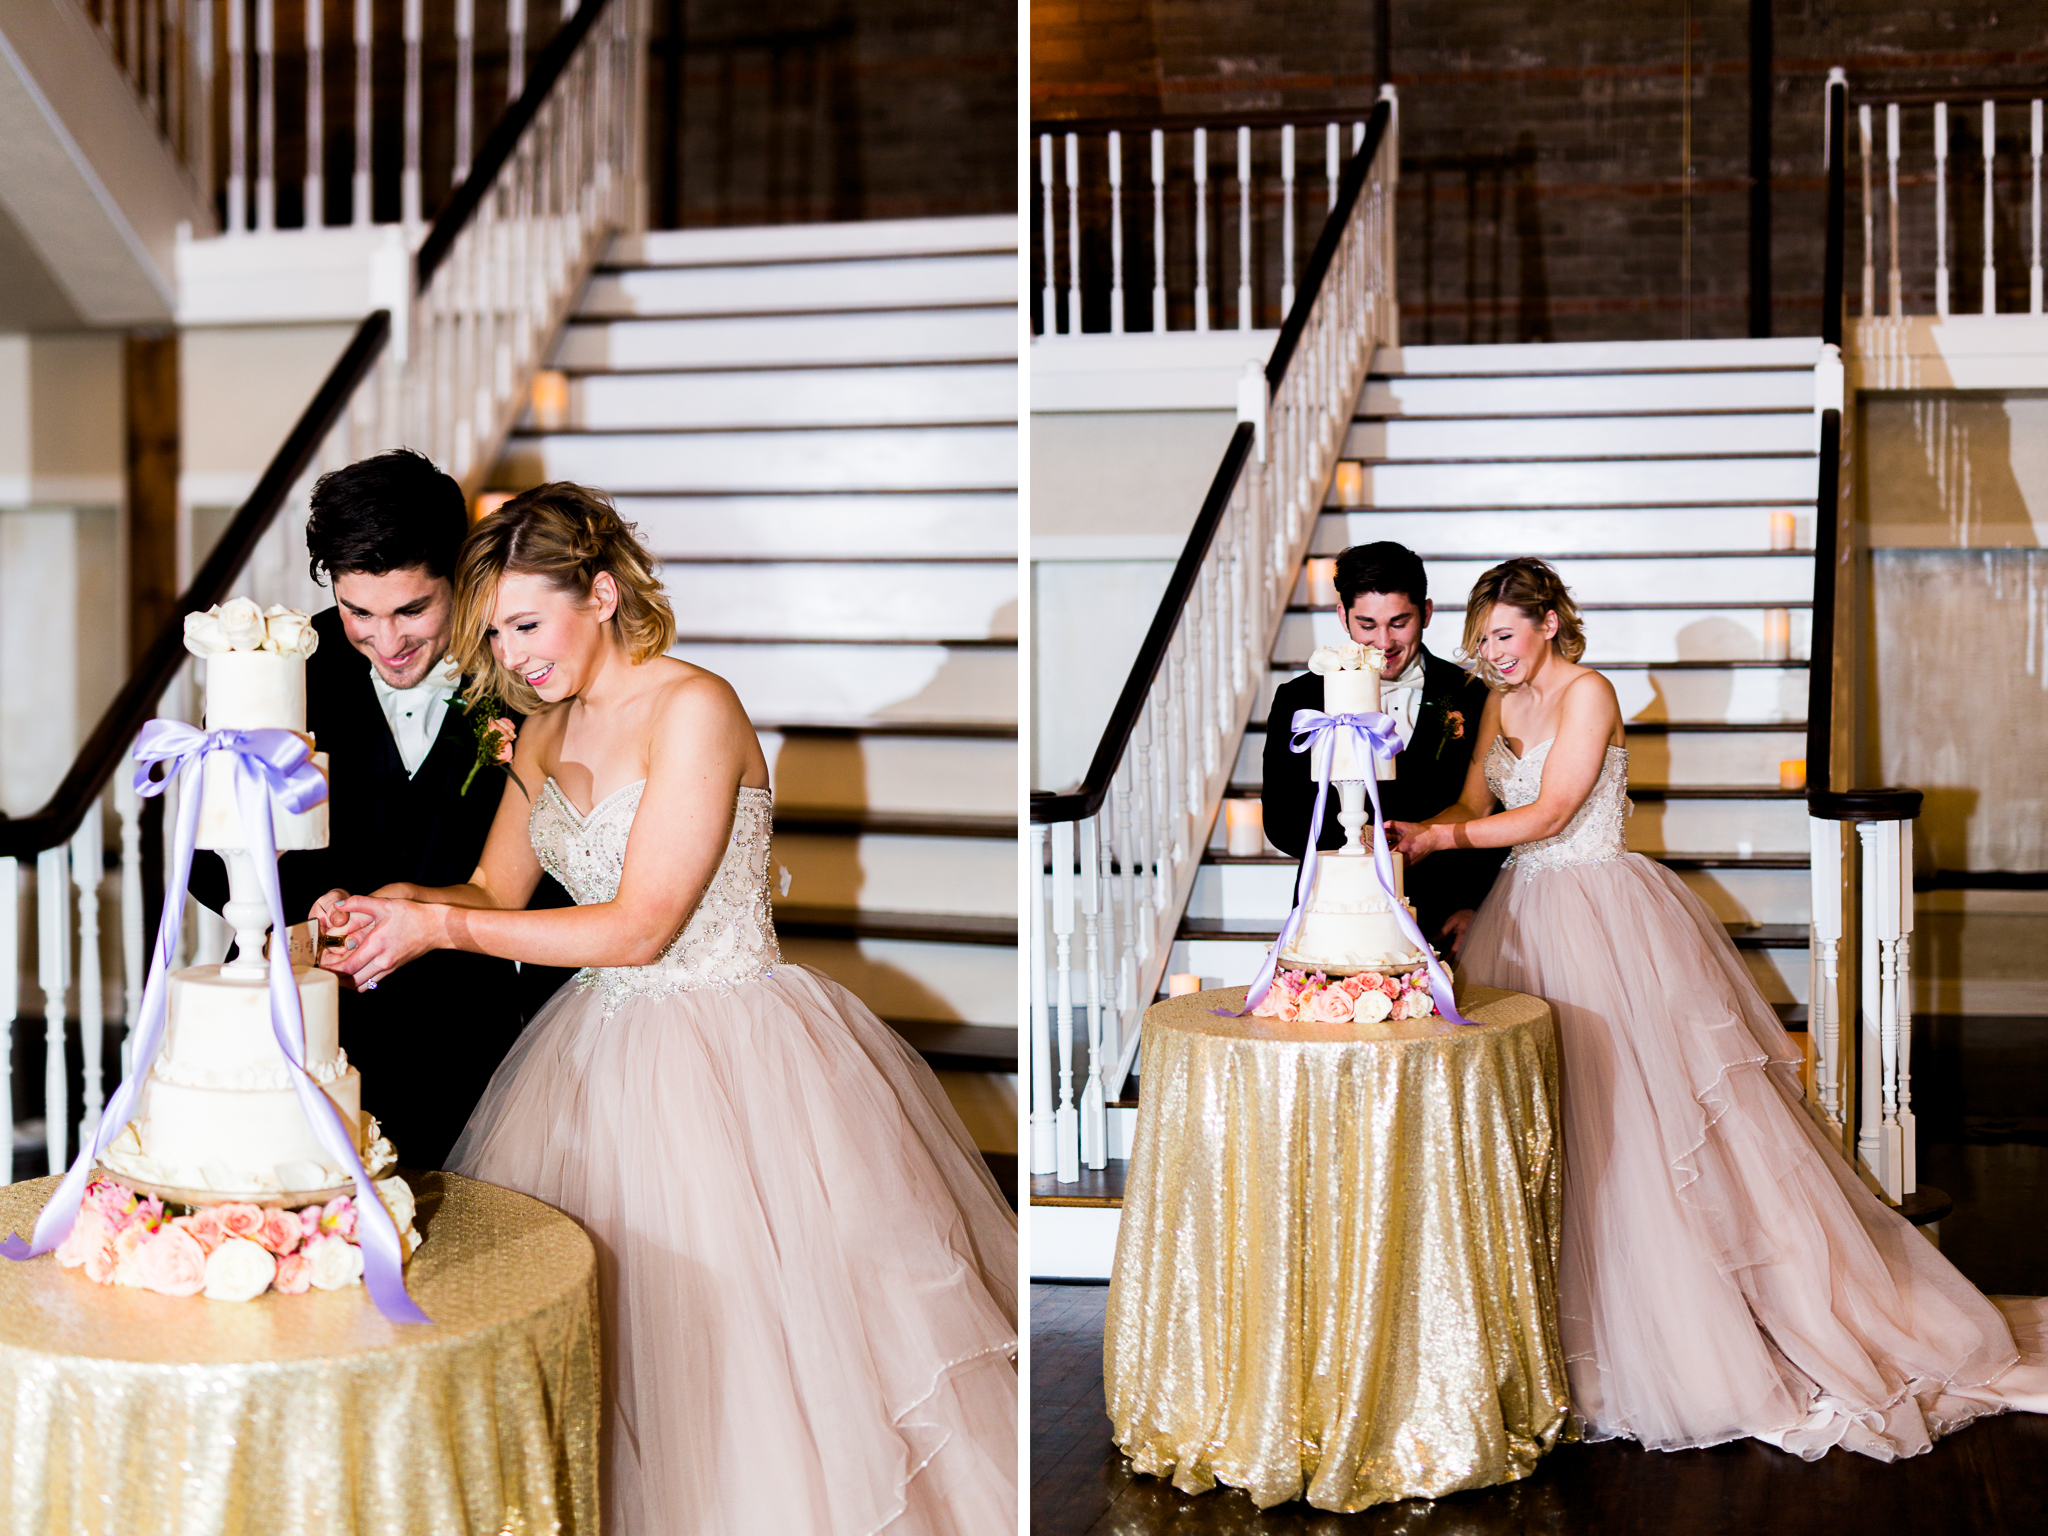 The Grand Canadian Theater OKC Purcell Wedding Venue Ashley Porton Photography cake cutting brown egg bakery .jpg